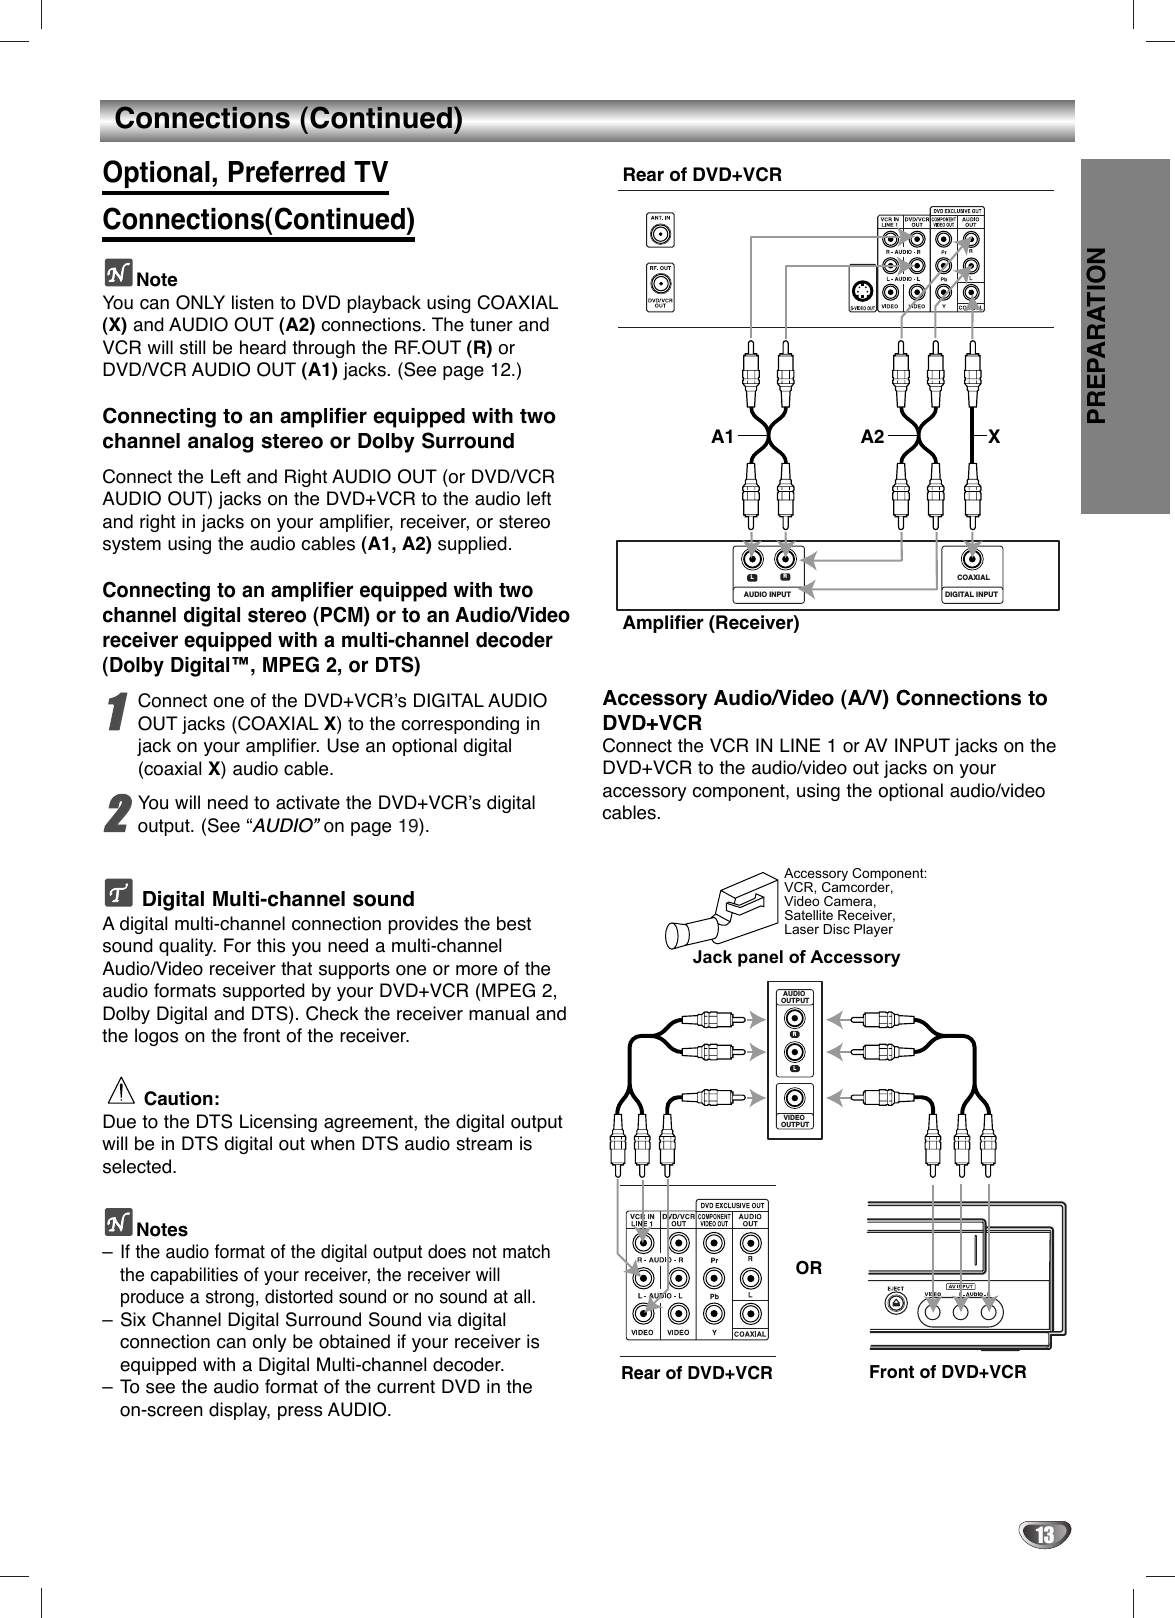 PREPARATION13Connections (Continued)Optional, Preferred TV Connections(Continued)NoteYou can ONLY listen to DVD playback using COAXIAL(X) and AUDIO OUT (A2) connections. The tuner andVCR will still be heard through the RF.OUT (R) orDVD/VCR AUDIO OUT (A1) jacks. (See page 12.)Connecting to an amplifier equipped with twochannel analog stereo or Dolby SurroundConnect the Left and Right AUDIO OUT (or DVD/VCRAUDIO OUT) jacks on the DVD+VCR to the audio leftand right in jacks on your amplifier, receiver, or stereosystem using the audio cables (A1, A2) supplied.Connecting to an amplifier equipped with twochannel digital stereo (PCM) or to an Audio/Videoreceiver equipped with a multi-channel decoder(Dolby Digital™, MPEG 2, or DTS)11Connect one of the DVD+VCR’s DIGITAL AUDIOOUT jacks (COAXIAL X) to the corresponding injack on your amplifier. Use an optional digital (coaxial X) audio cable.22You will need to activate the DVD+VCR’s digitaloutput. (See “AUDIO” on page 19).Digital Multi-channel soundAdigital multi-channel connection provides the bestsound quality. For this you need a multi-channelAudio/Video receiver that supports one or more of theaudio formats supported by your DVD+VCR (MPEG 2,Dolby Digital and DTS). Check the receiver manual andthe logos on the front of the receiver.Caution:Due to the DTS Licensing agreement, the digital outputwill be in DTS digital out when DTS audio stream isselected.Notes–If the audio format of the digital output does not matchthe capabilities of your receiver, the receiver will produce a strong, distorted sound or no sound at all. –Six Channel Digital Surround Sound via digital connection can only be obtained if your receiver isequipped with a Digital Multi-channel decoder. –To see the audio format of the current DVD in the on-screen display, press AUDIO.Accessory Audio/Video (A/V) Connections toDVD+VCRConnect the VCR IN LINE 1 or AV INPUT jacks on theDVD+VCR to the audio/video out jacks on your accessory component, using the optional audio/videocables.LRAUDIO INPUT DIGITAL INPUTCOAXIALRear of DVD+VCRAmplifier (Receiver)A2A1 XAccessory Component:VCR, Camcorder, Video Camera,Satellite Receiver,Laser Disc PlayerLRVIDEO OUTPUTAUDIO OUTPUTJack panel of AccessoryRear of DVD+VCR Front of DVD+VCROR